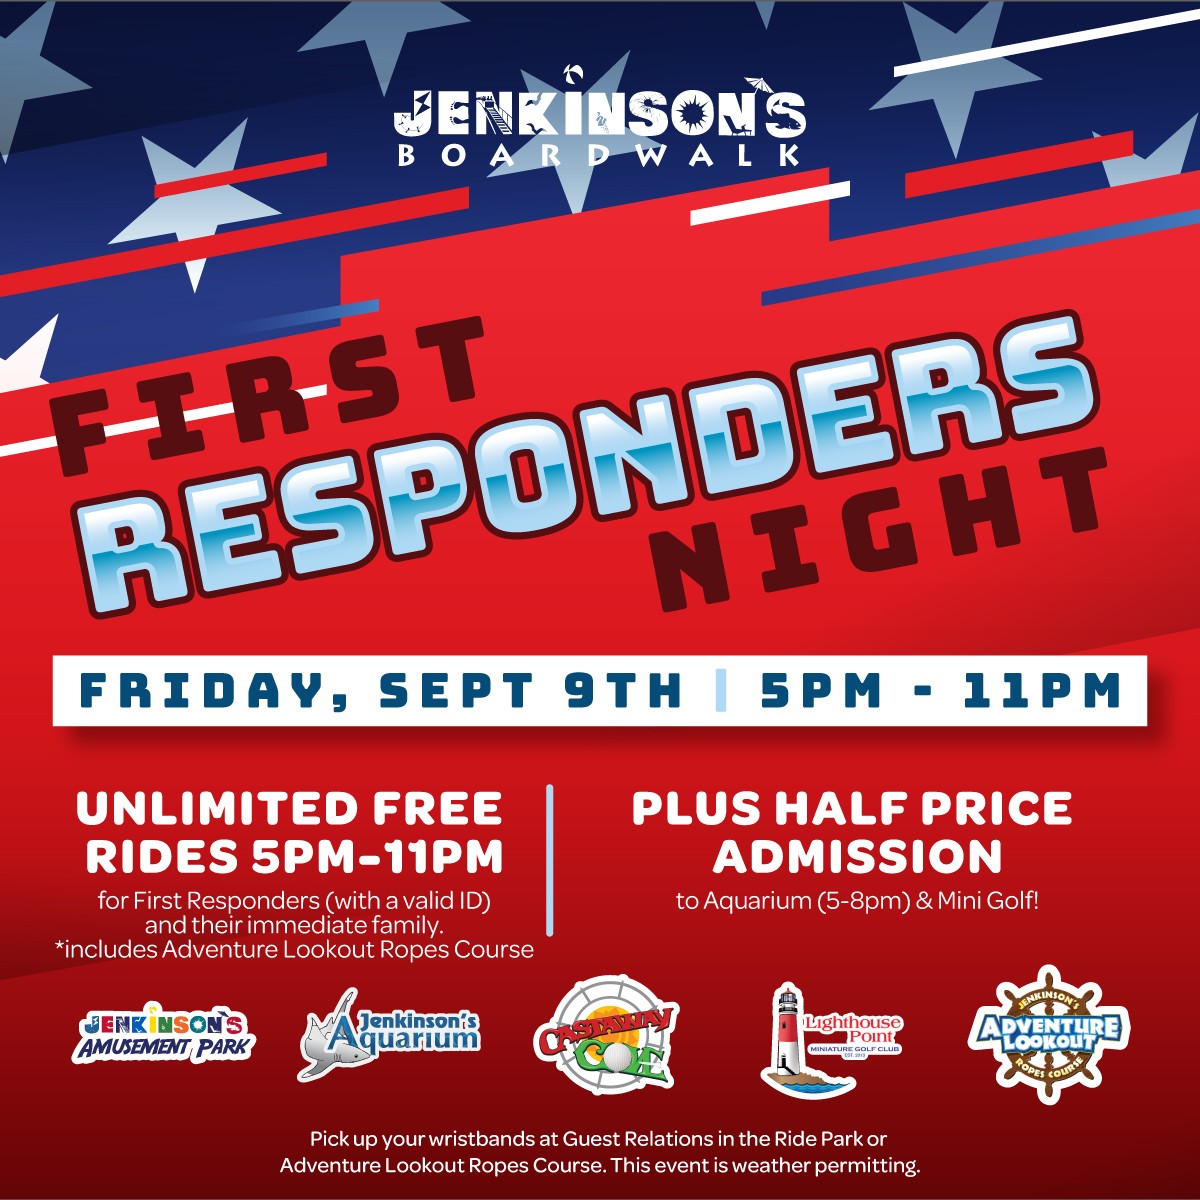 First Responders Day, Friday Sept 9th 5pm-11pm